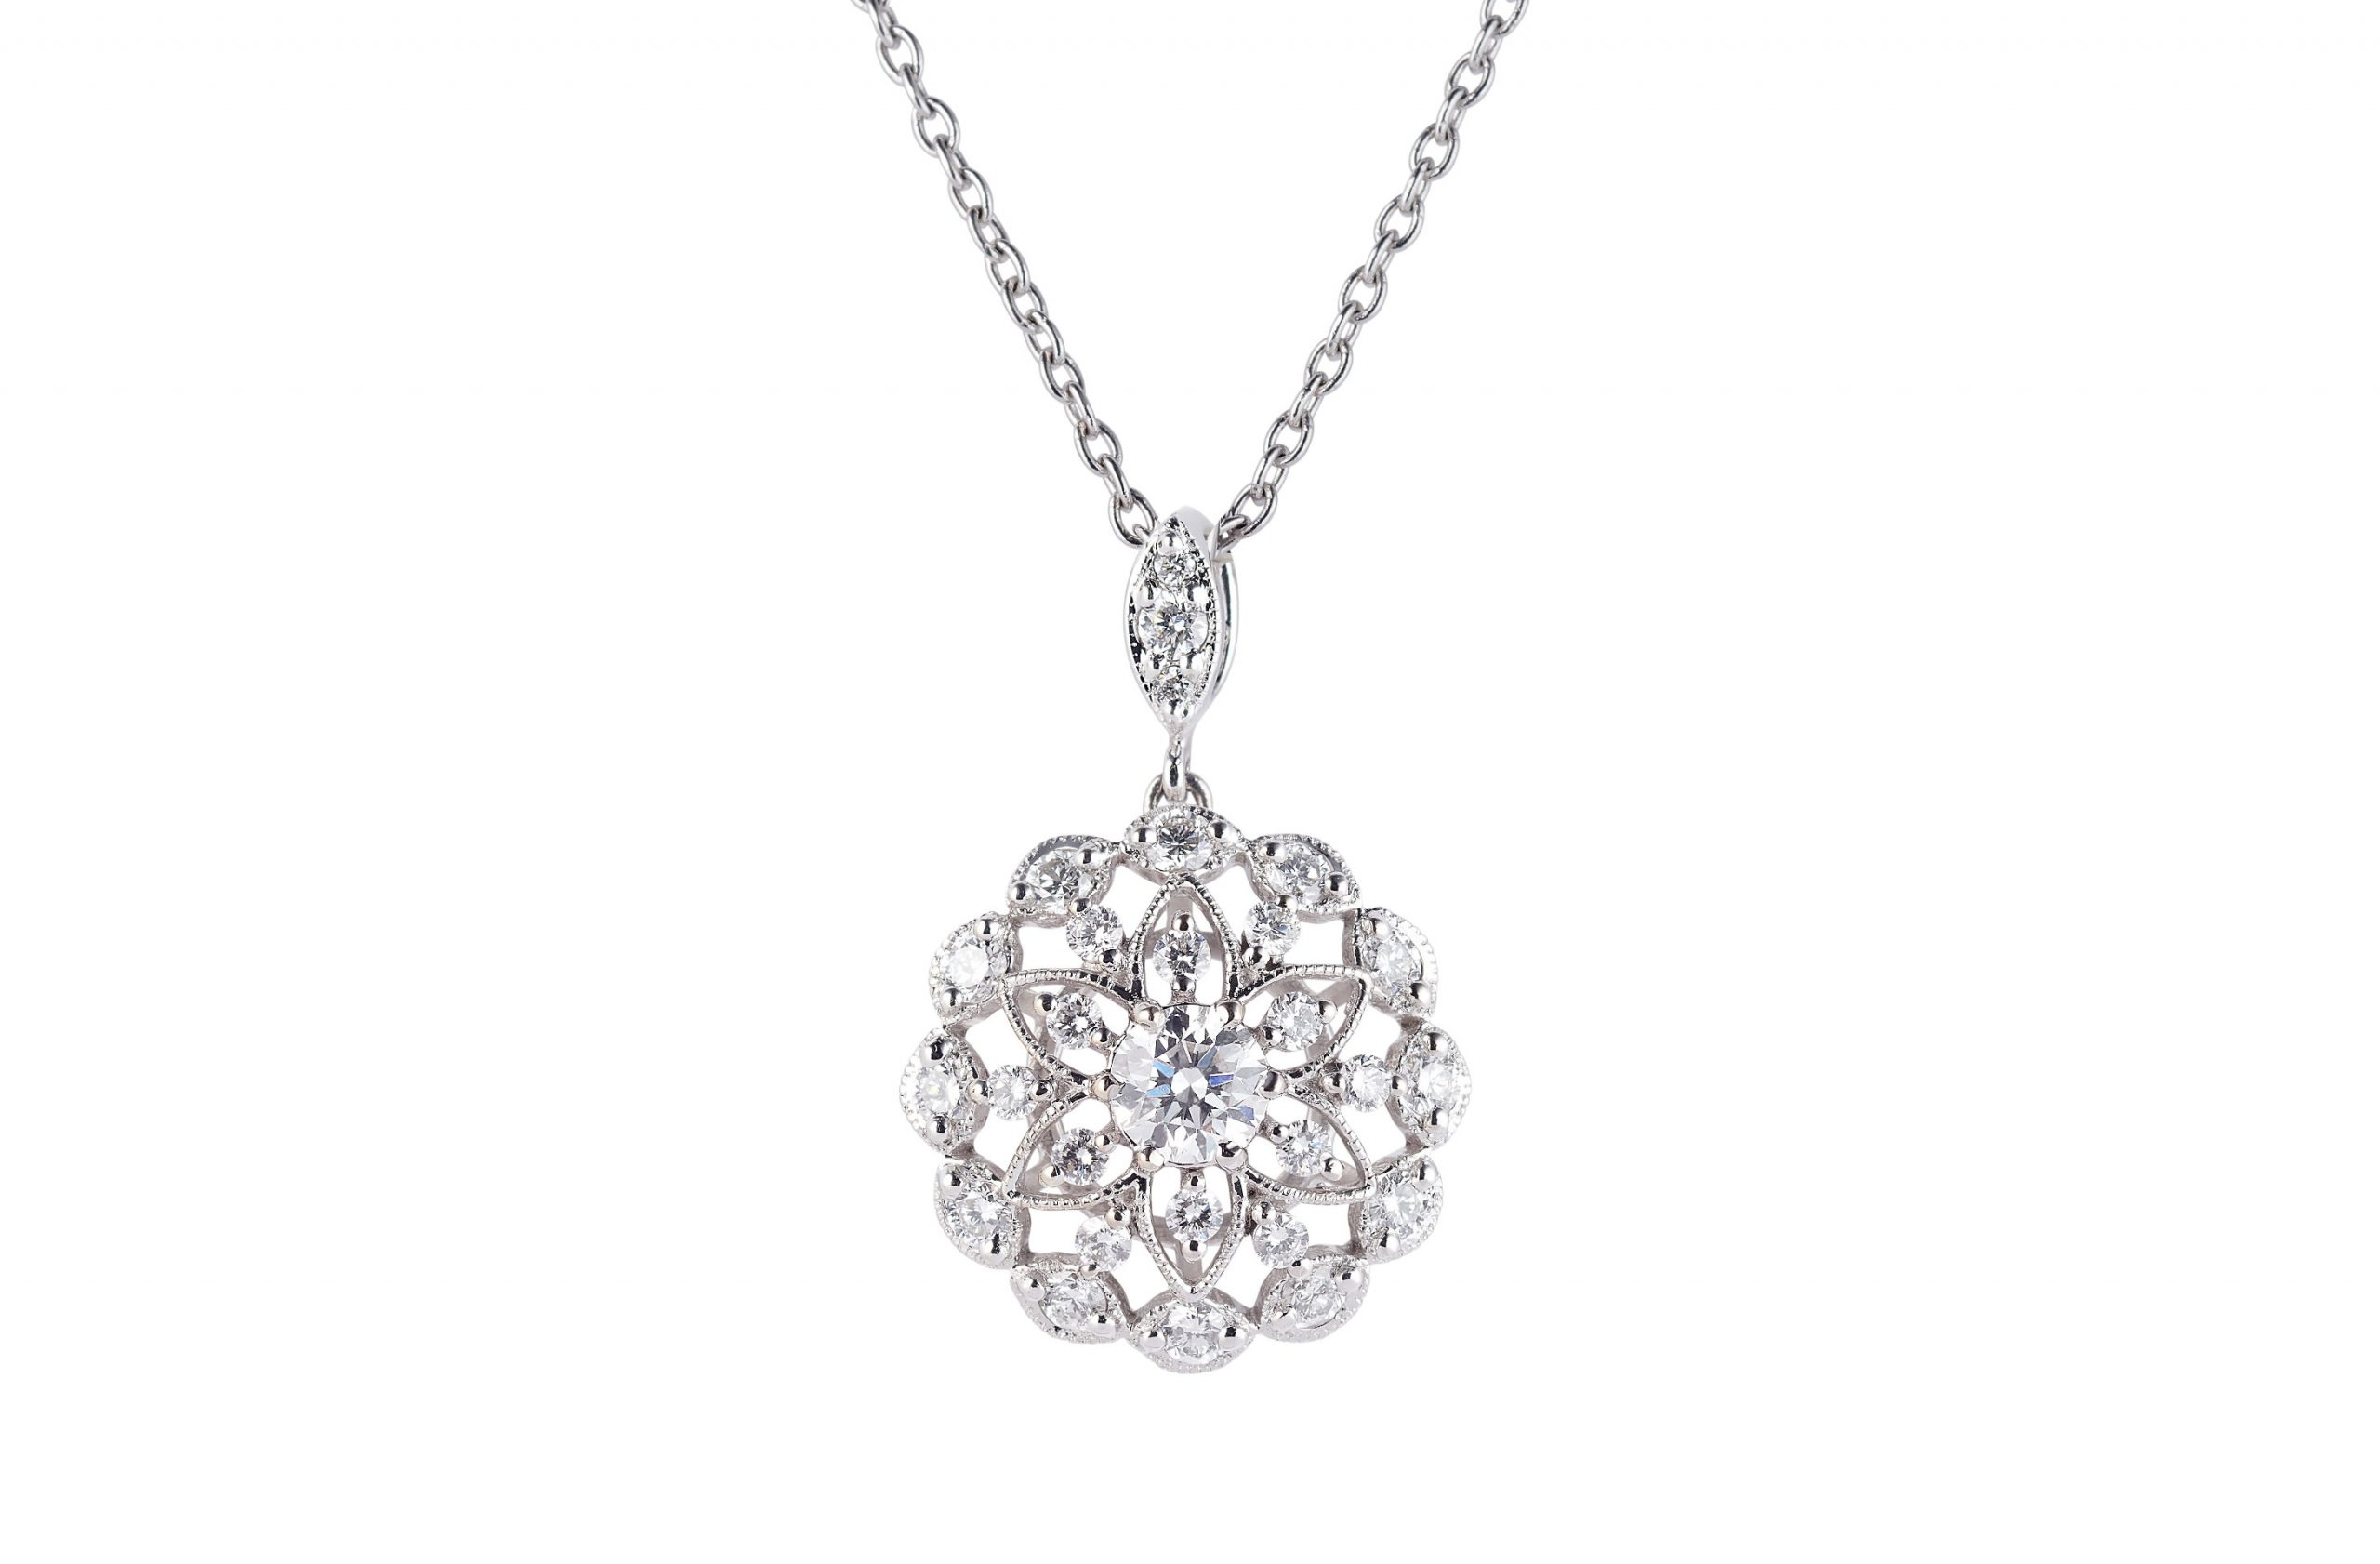 Sparkle: Christmas Jewellery at Charles Nobel